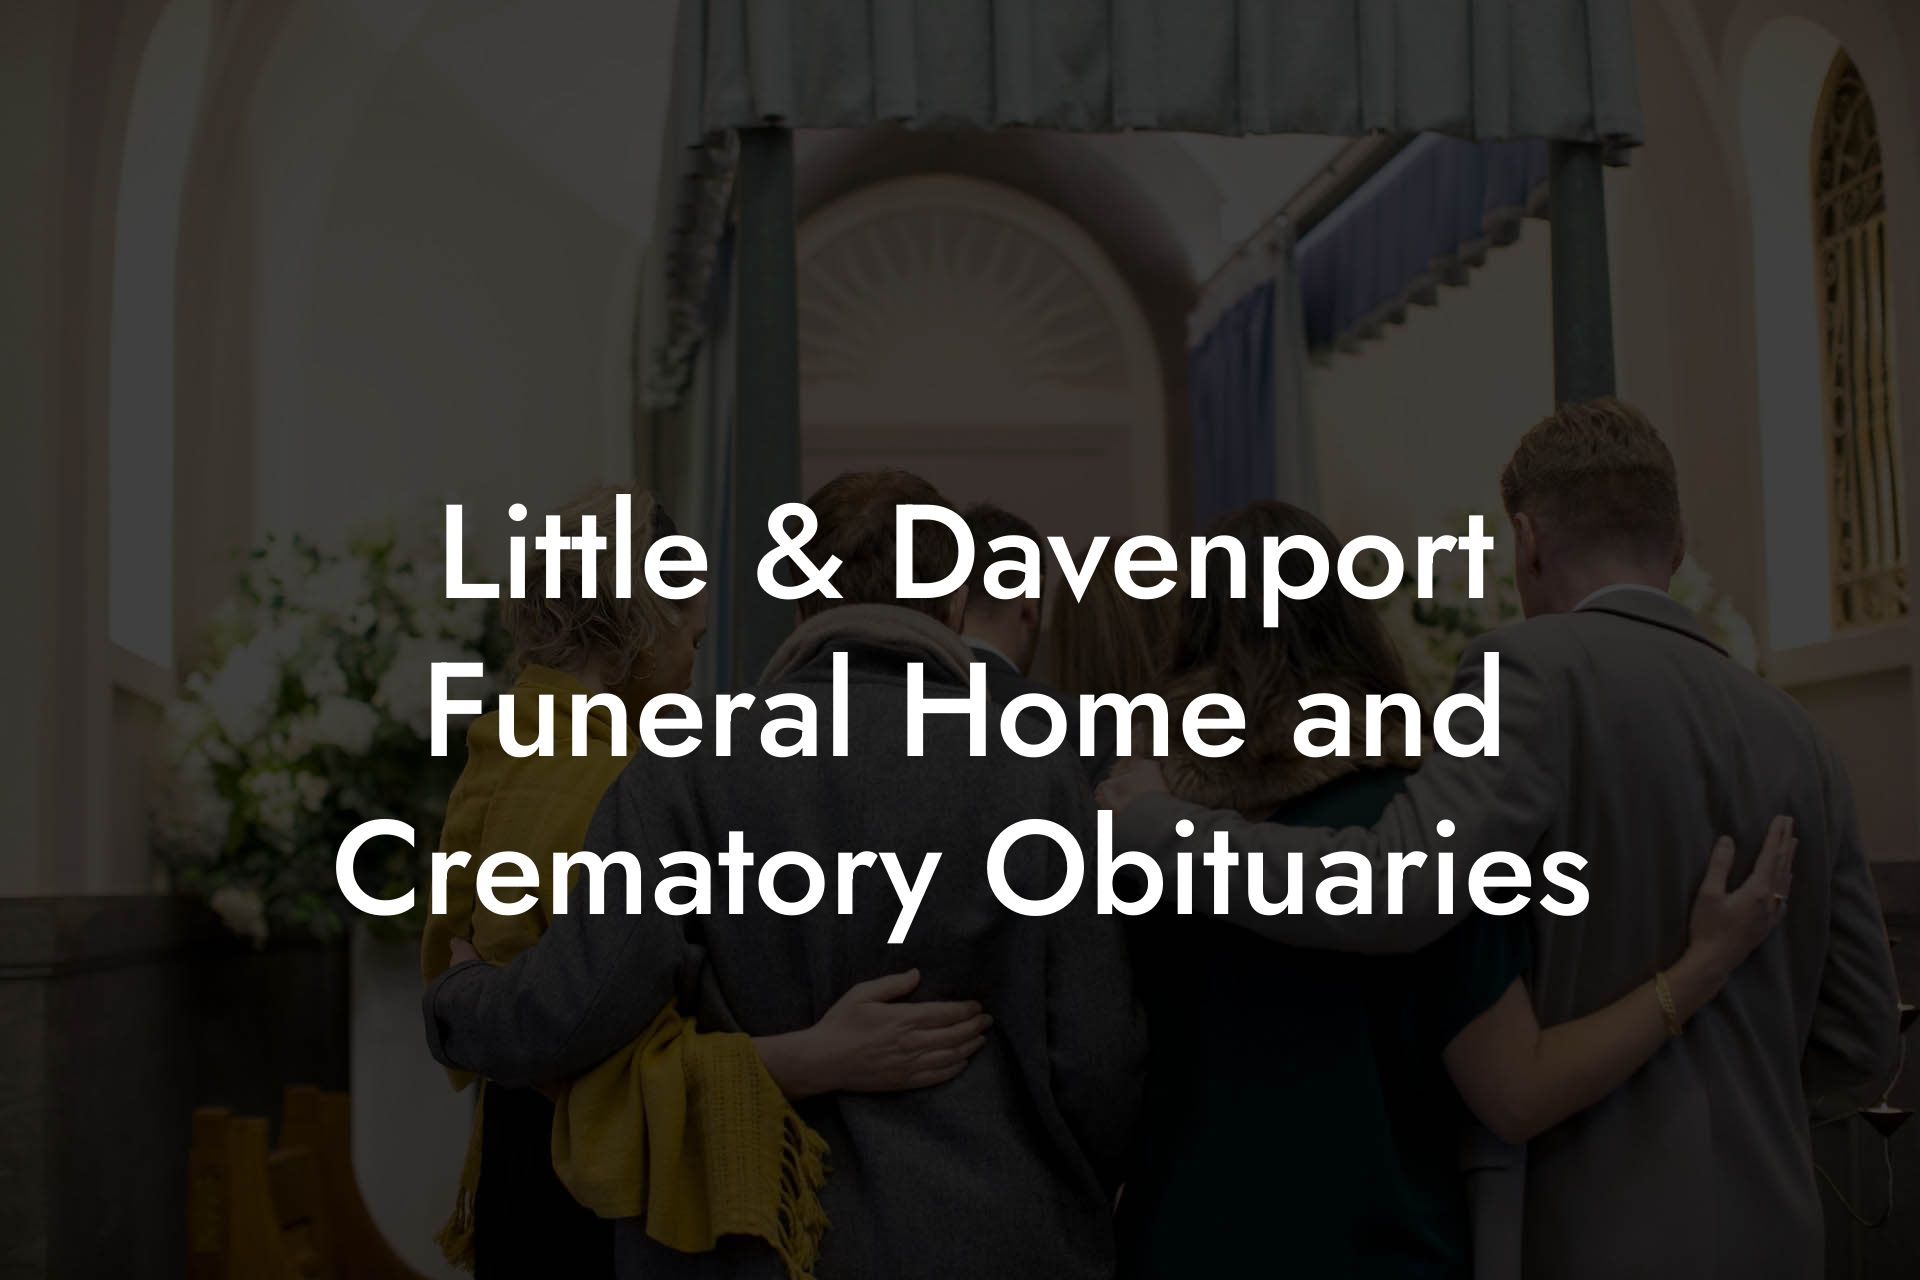 Little & Davenport Funeral Home and Crematory Obituaries